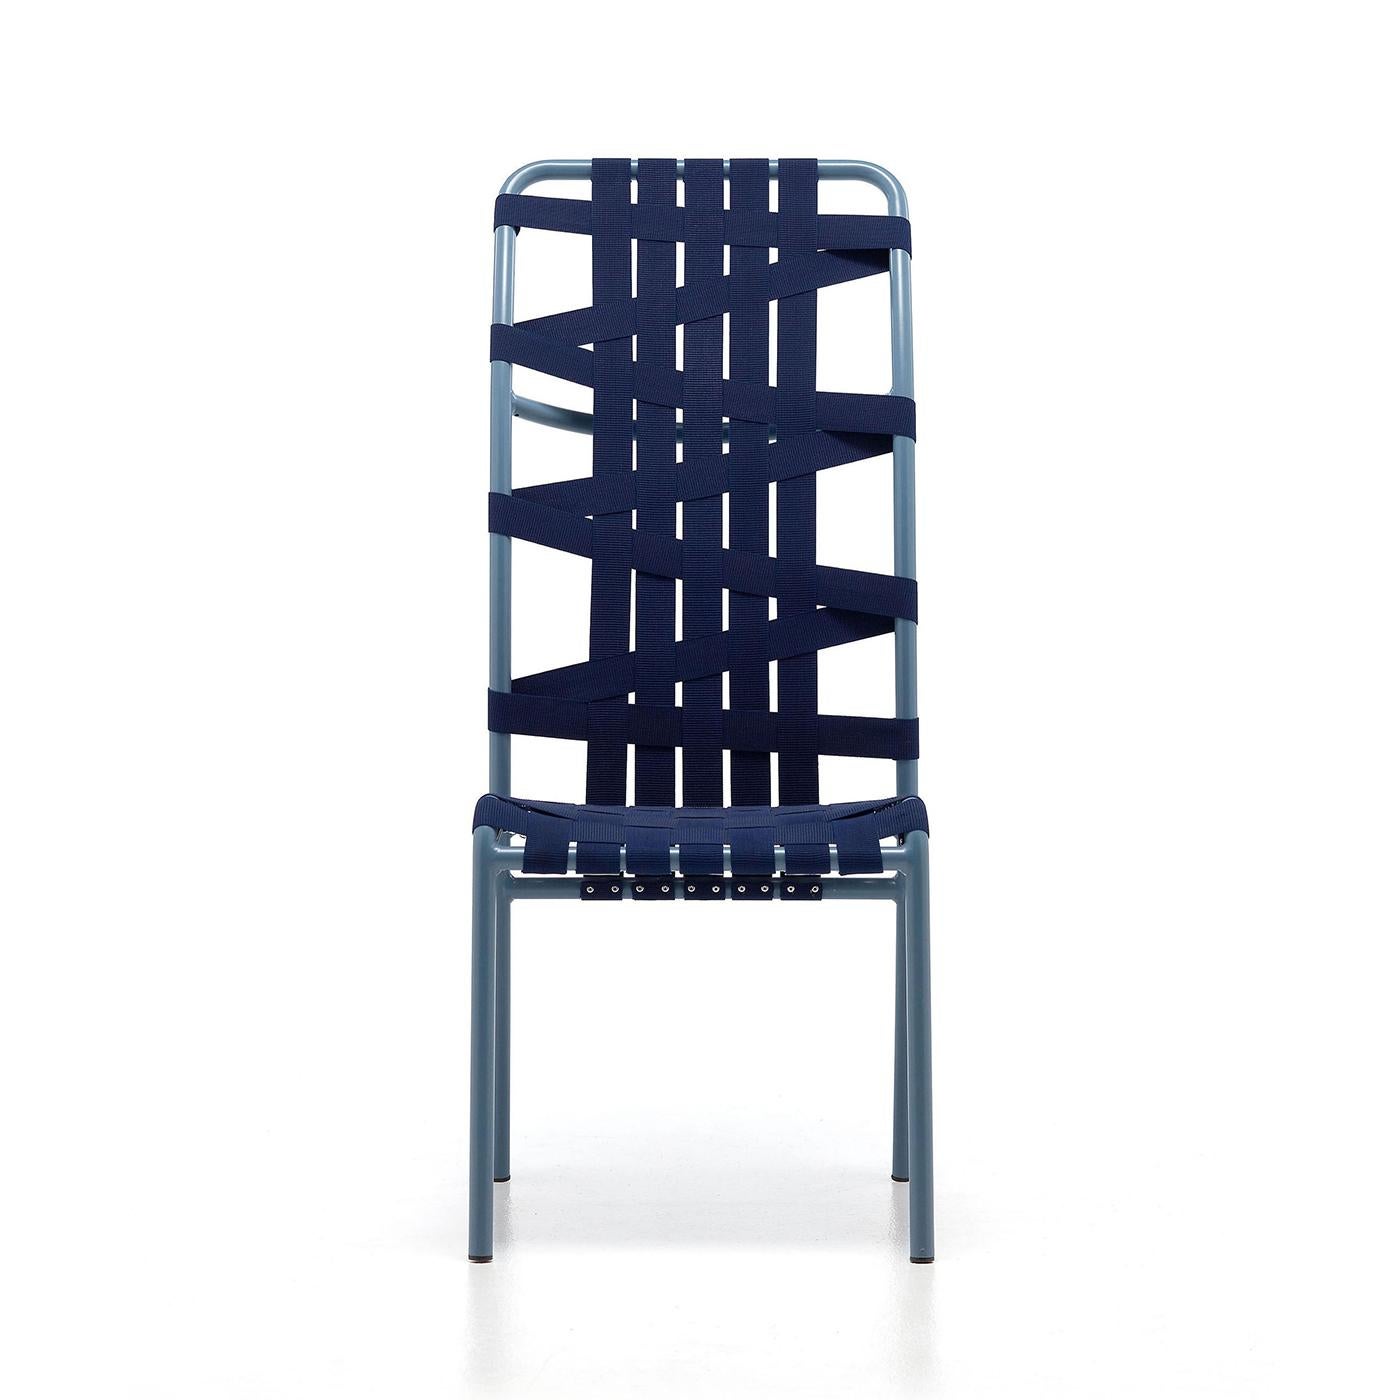 Chair weaving high back with aluminium structure in blue lacquered finish.
Seat and back made with blue elastic belts. Indoor or outdoor use.
Also available with structure in dark grey lacquered finish with light grey elastic belts
or with